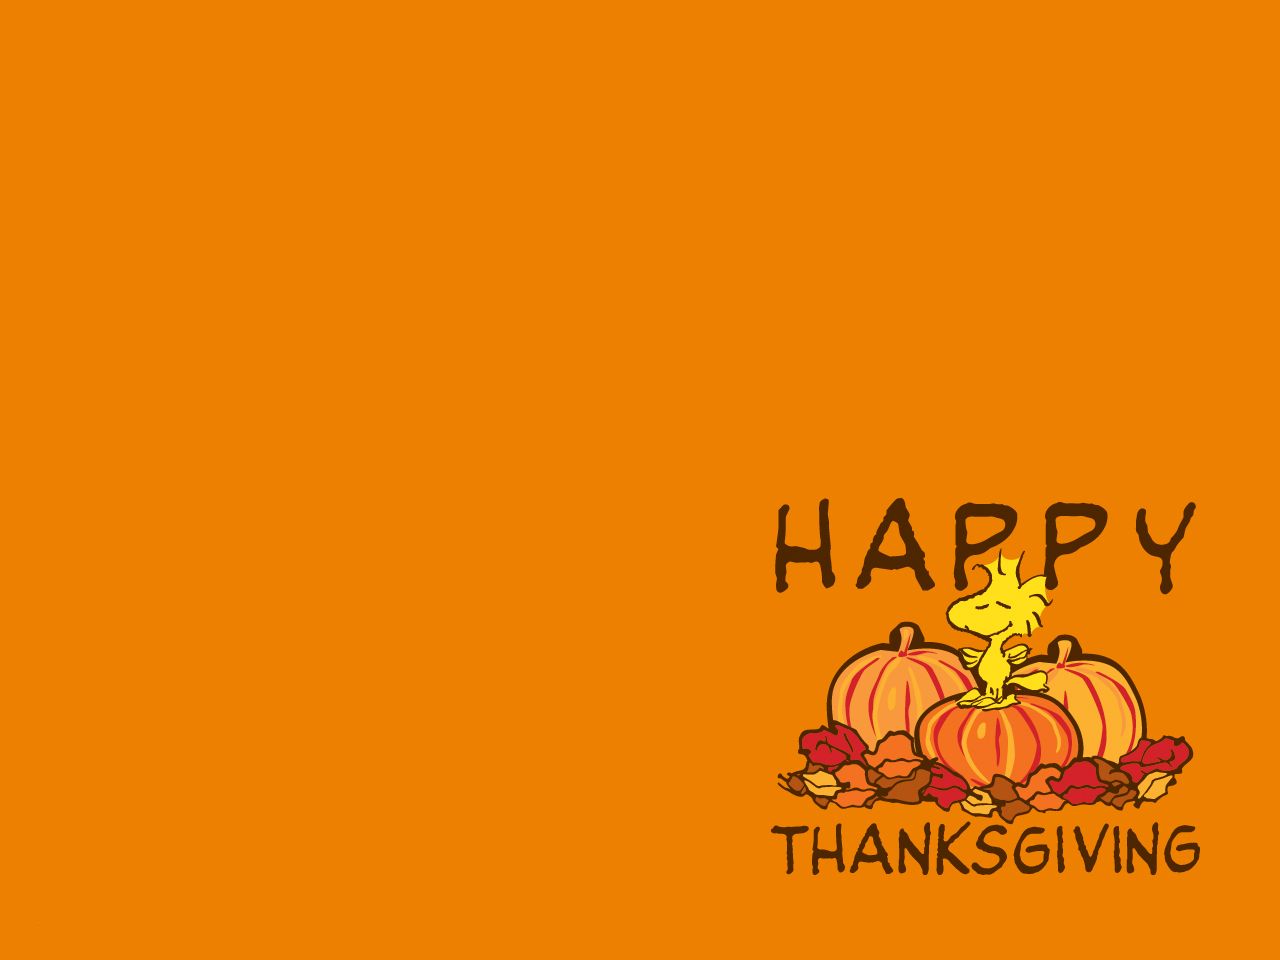 Thanksgiving Day - Thanksgiving Backgrounds For Ipad - HD Wallpaper 